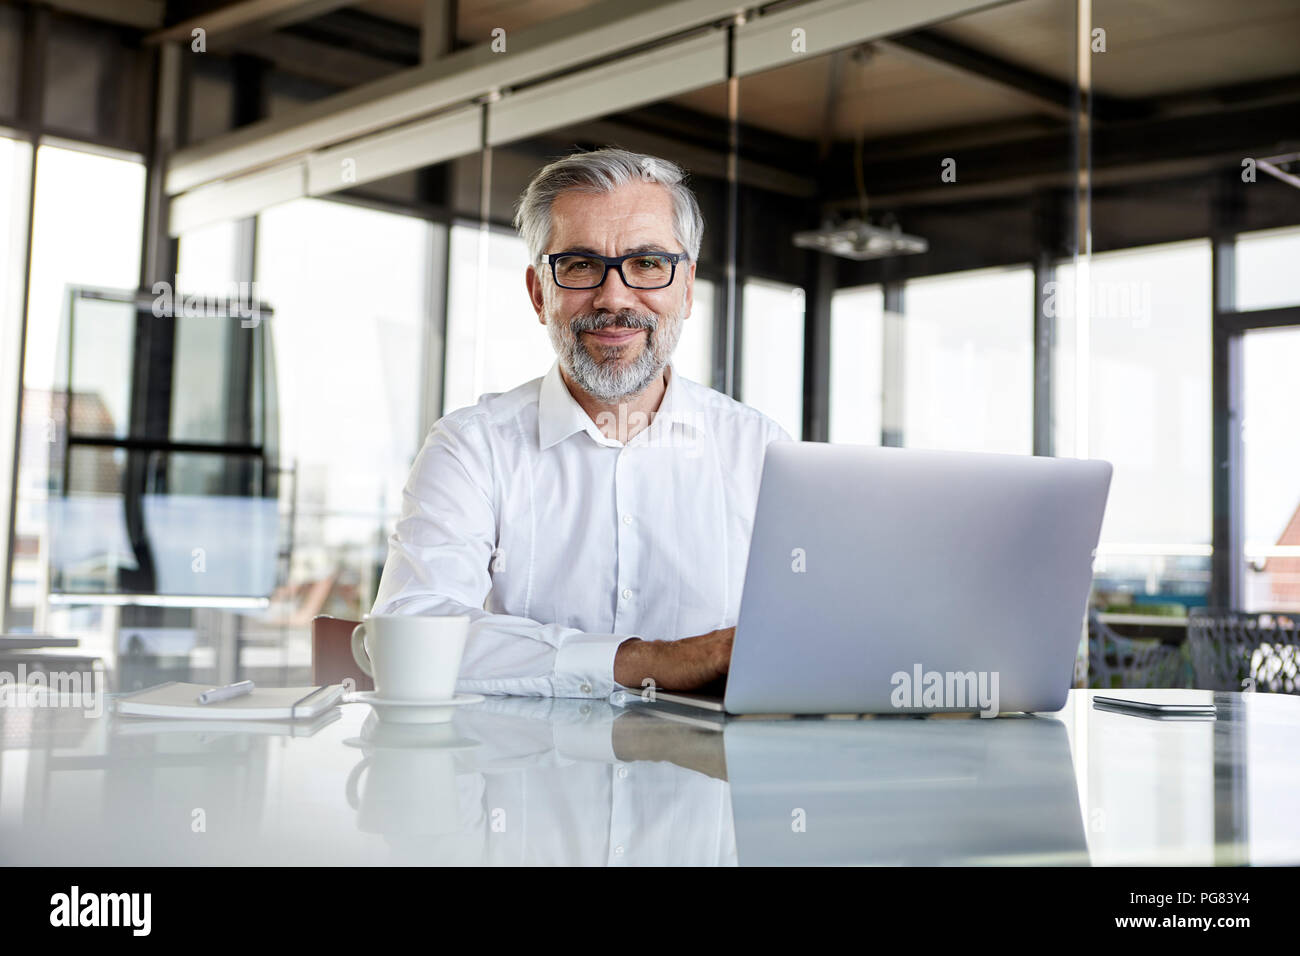 Portrait of smiling businessman with laptop at desk in office Banque D'Images